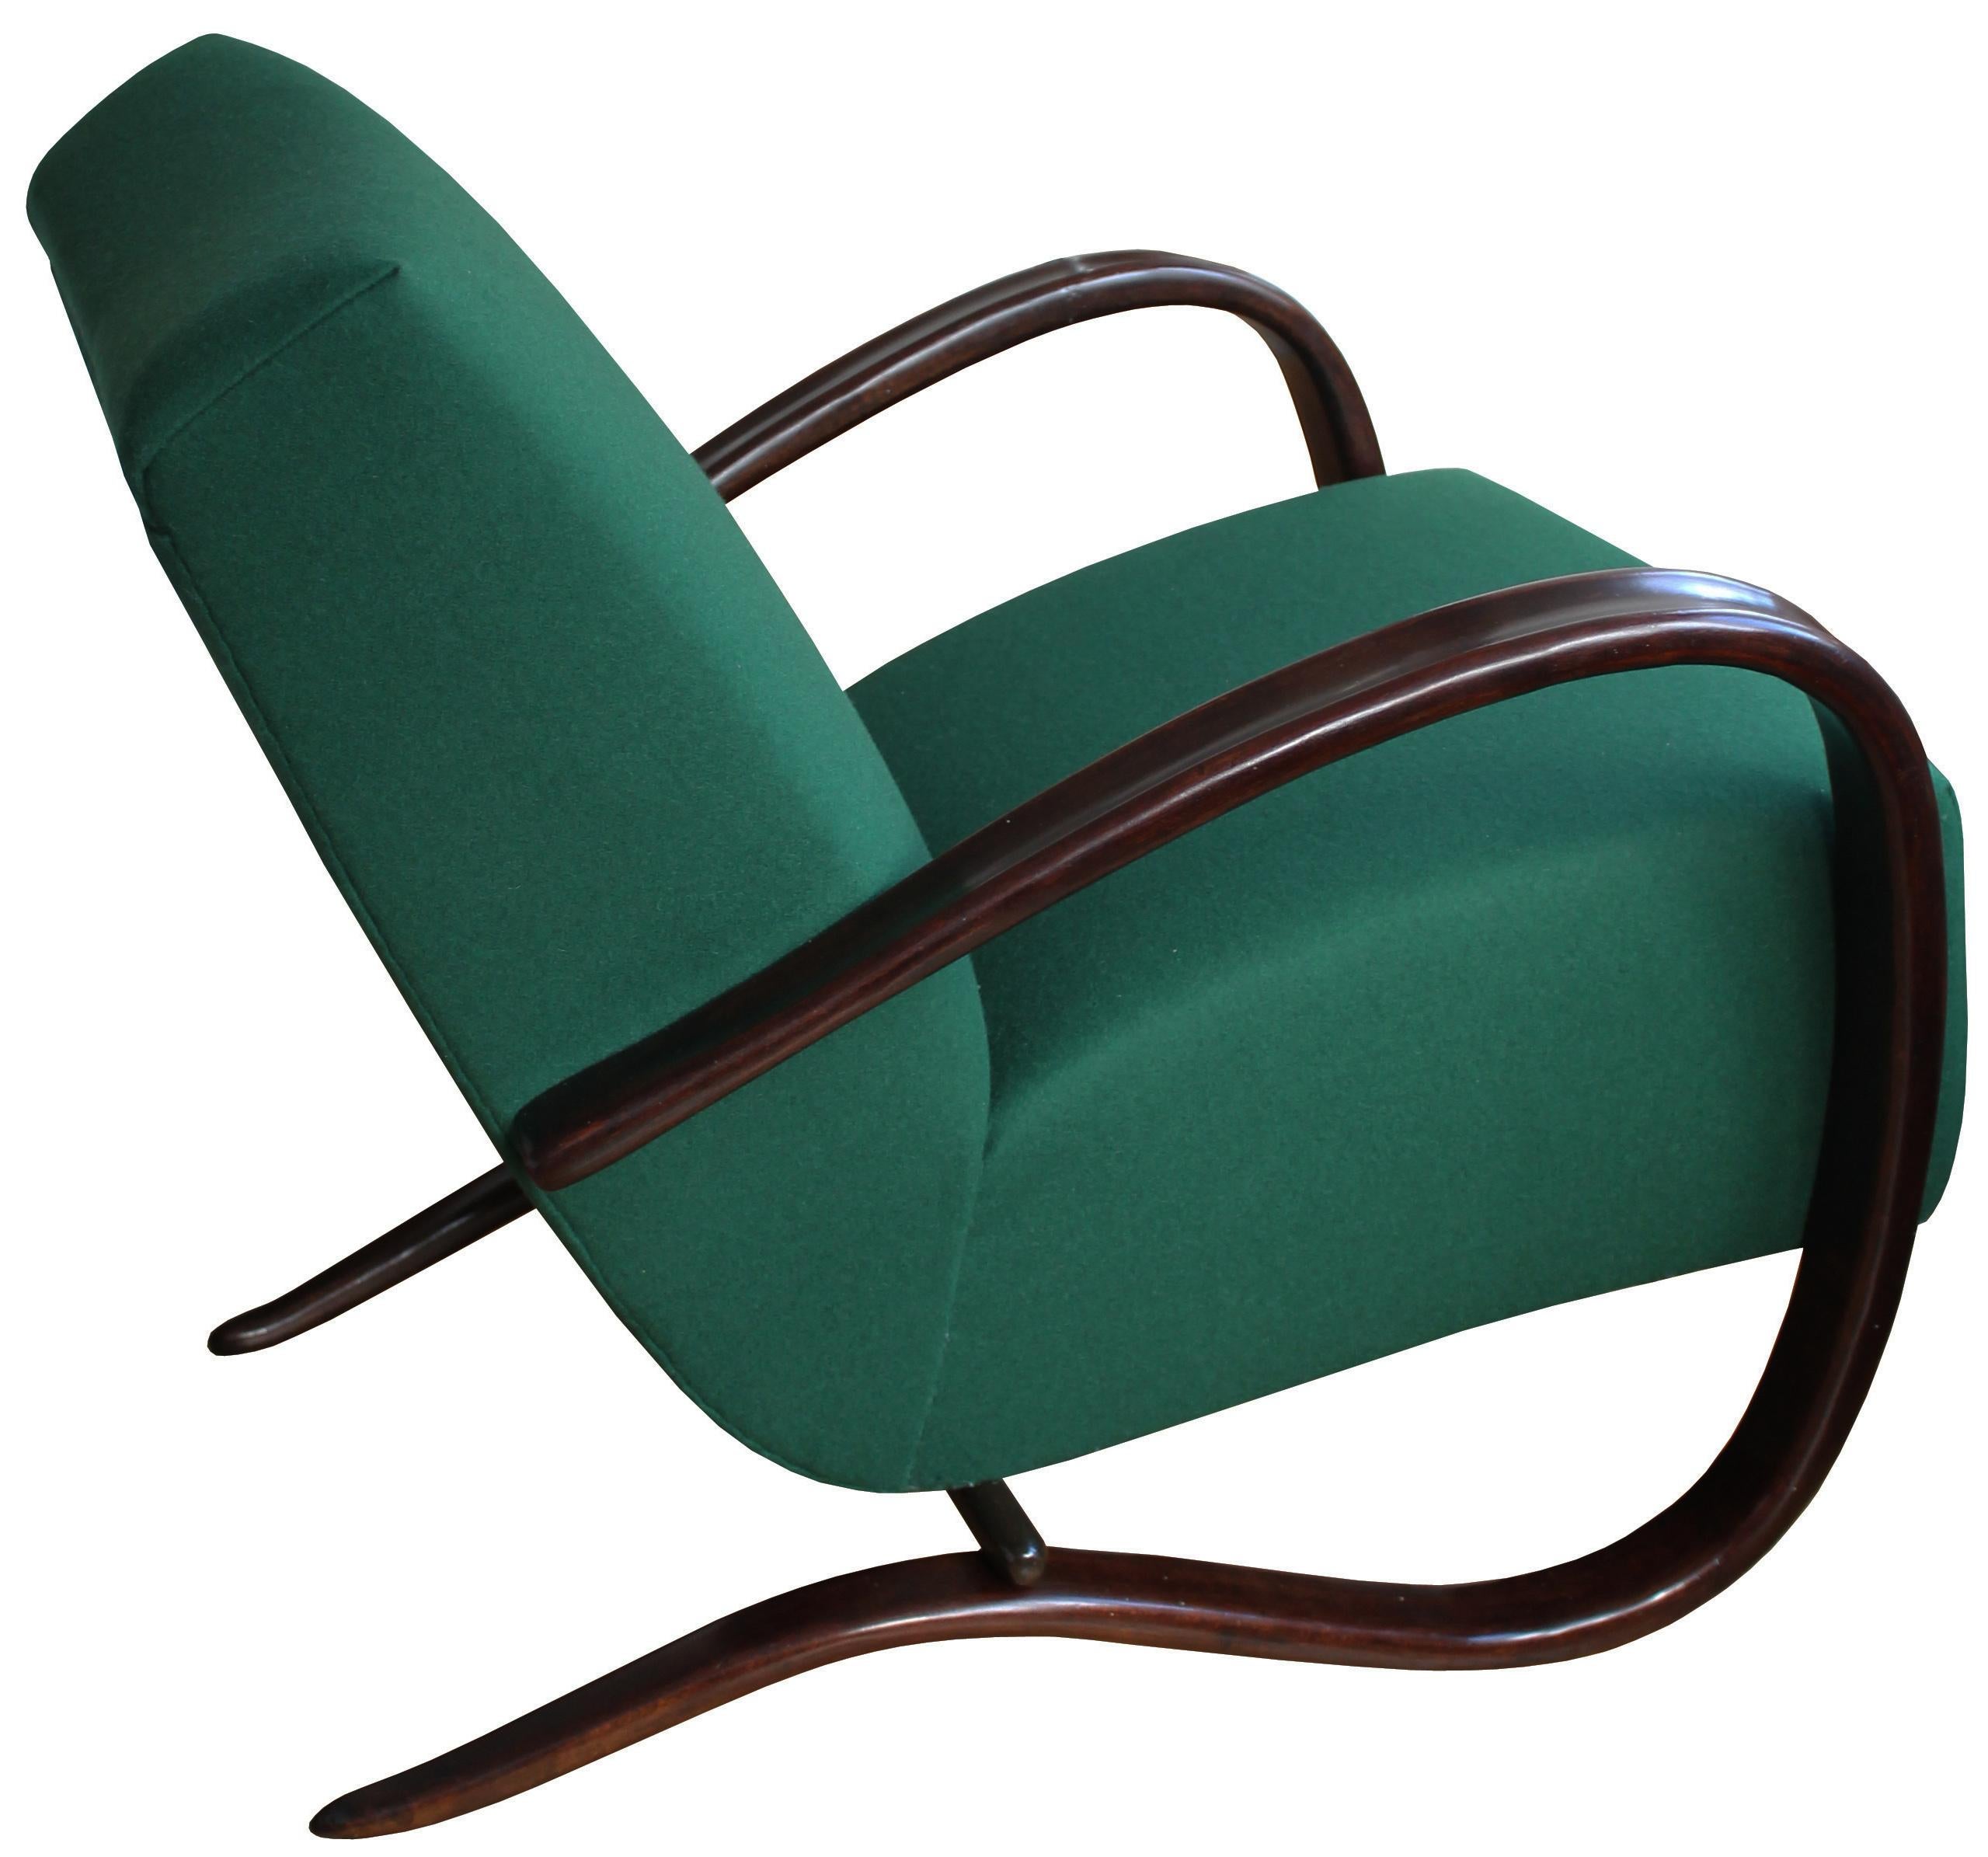 Probably the most famous 20th century Czech piece of furniture, this H 269 armchair was originally designed in 1933 by Jindrich Halabala for the legendary brand UP Brno and is now a true icon.

The main design feature is the two continuous